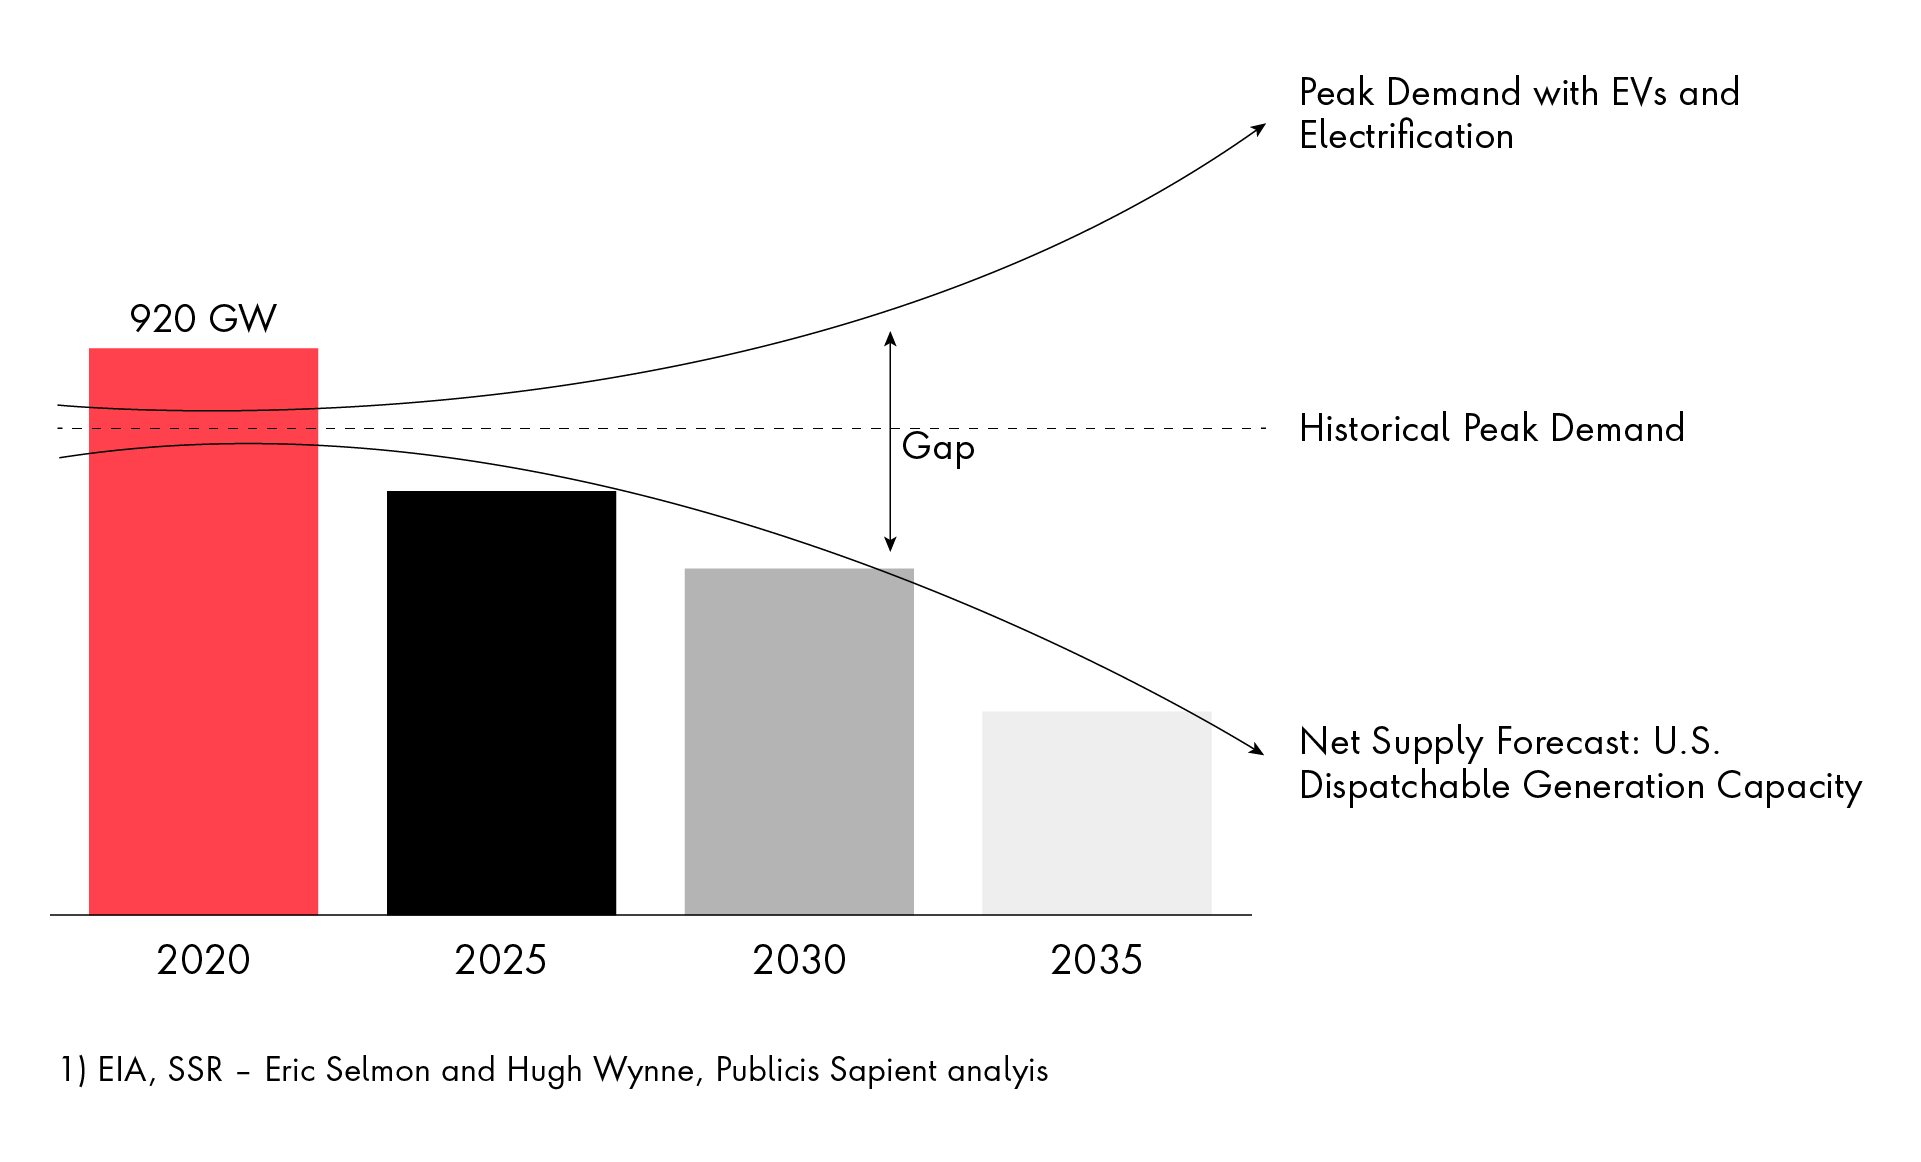 Bar graph shows an increasing demand and a decreasing supply of dispatchable generation from 2020 to 2035.